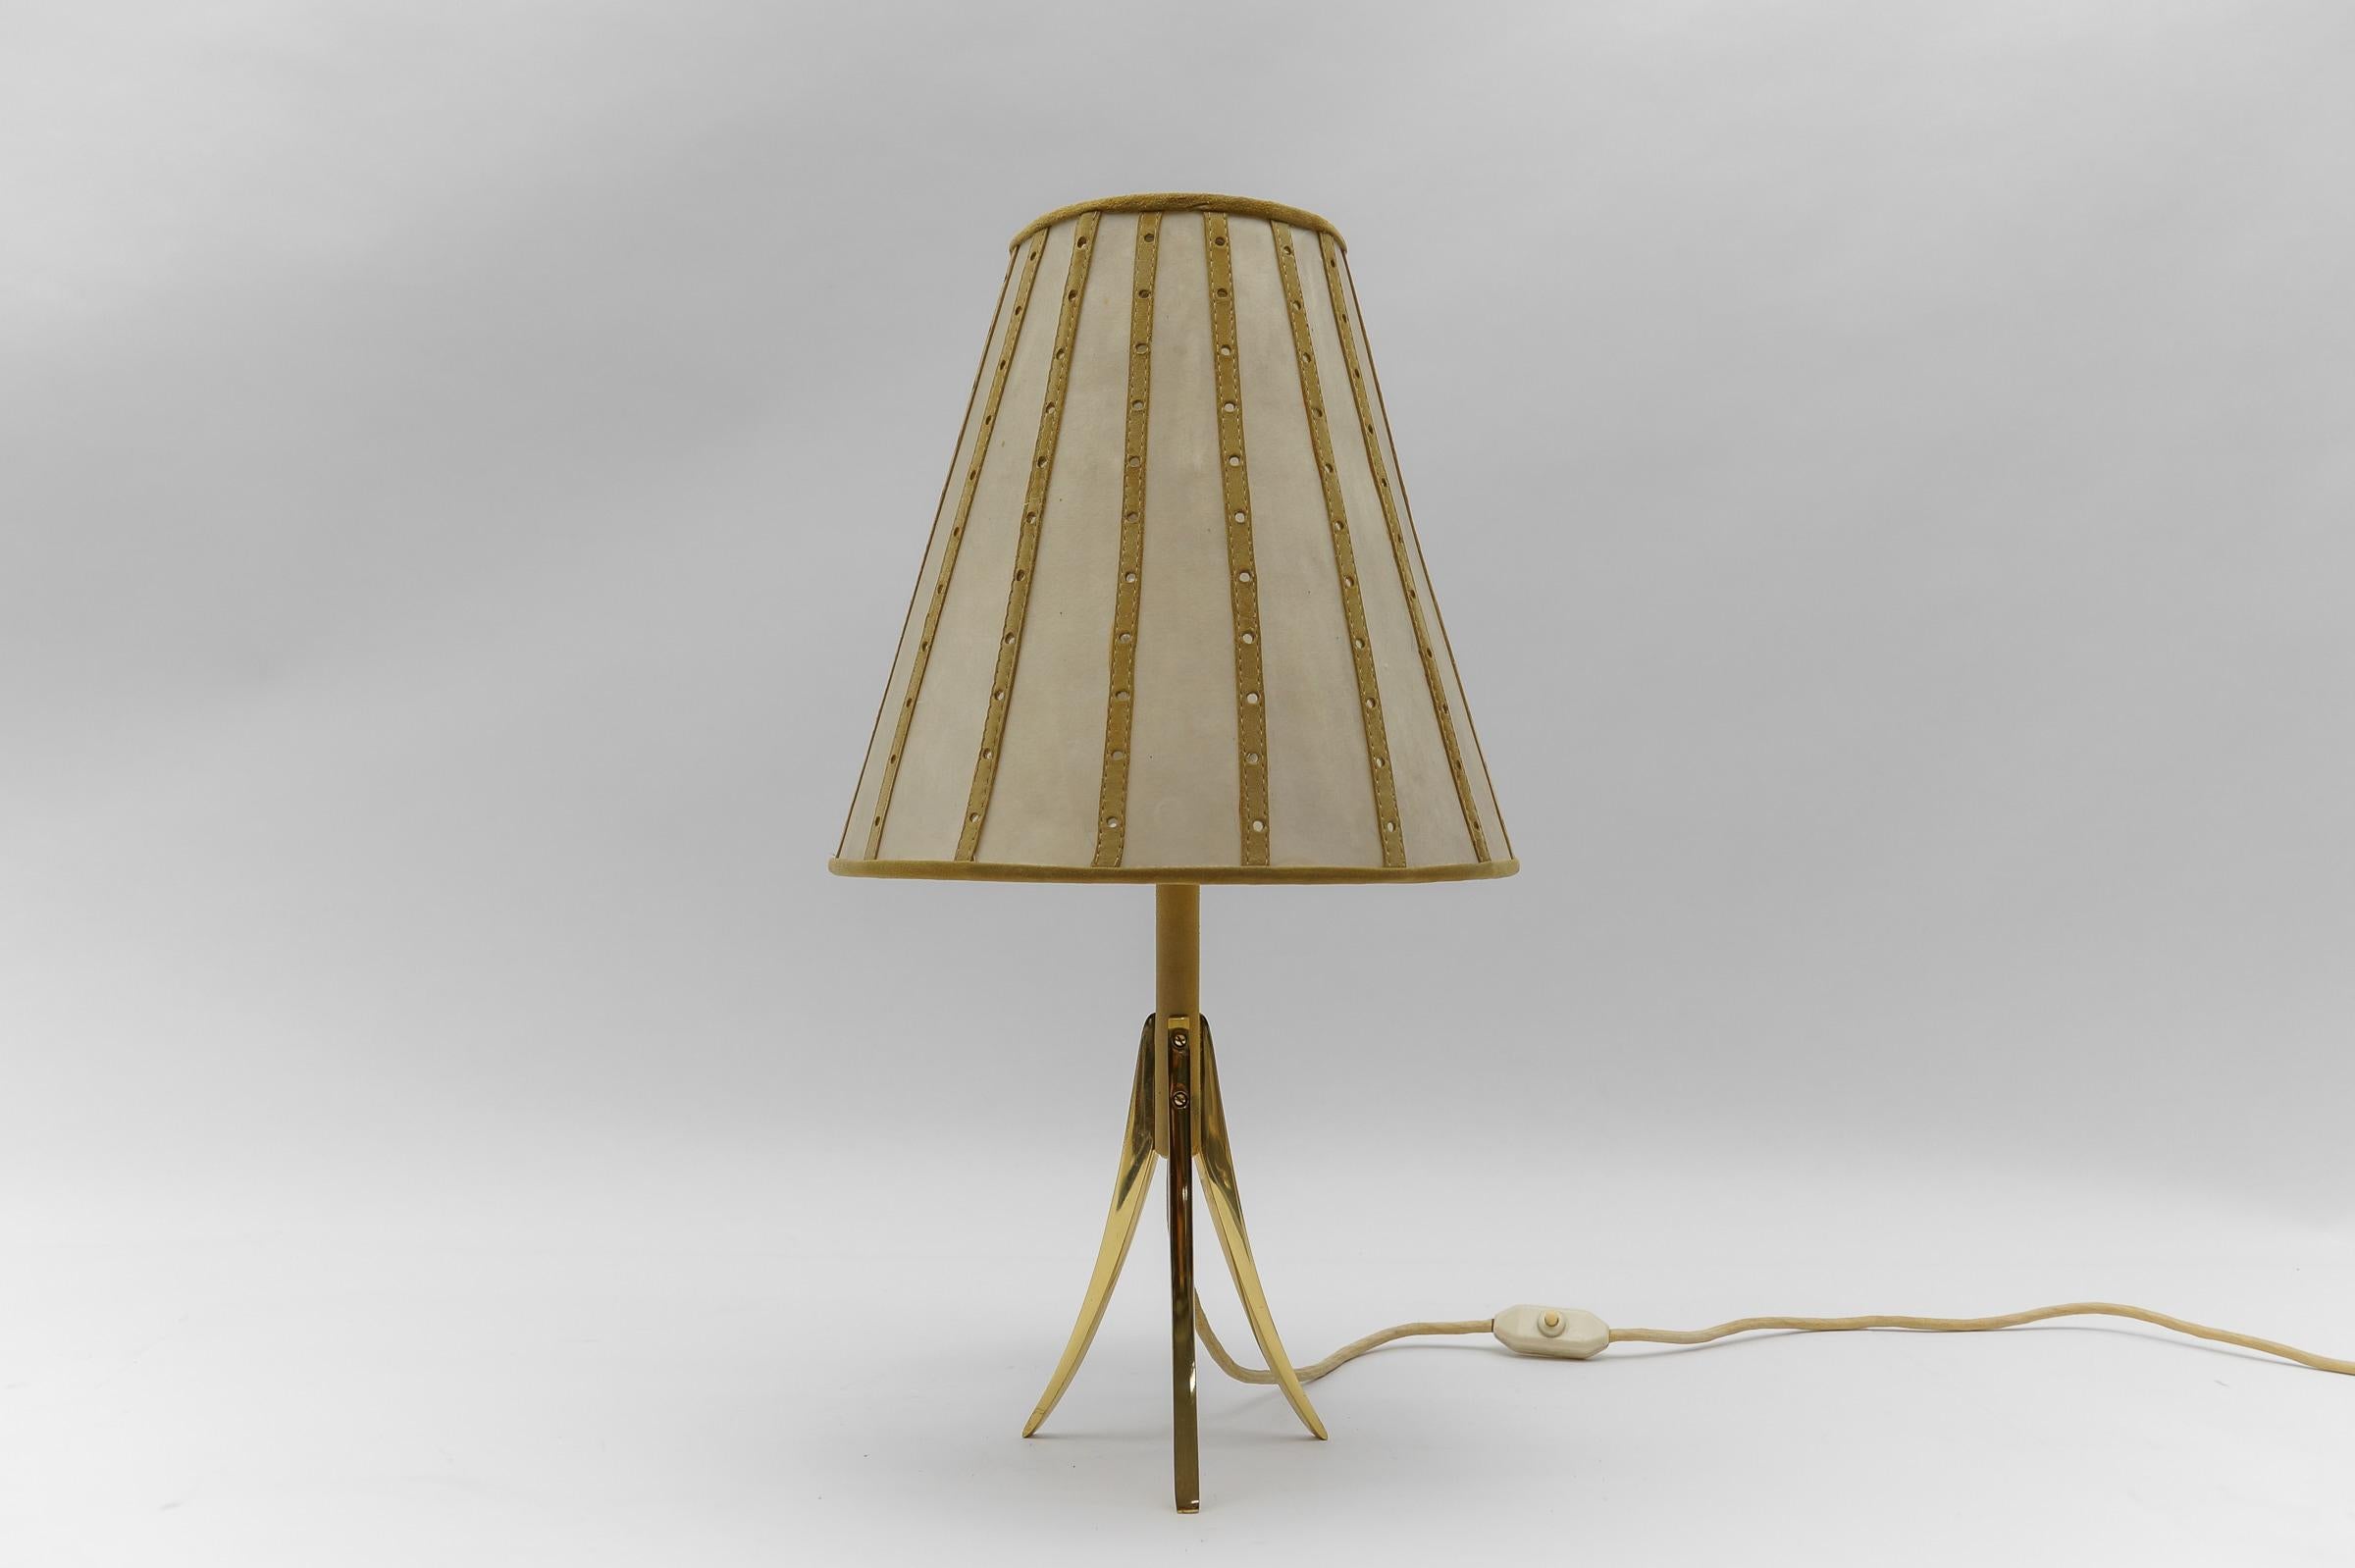 Mid-20th Century Mid-Century Modern Tripod Table Lamp made in Brass and Leather, 1960s Austria 